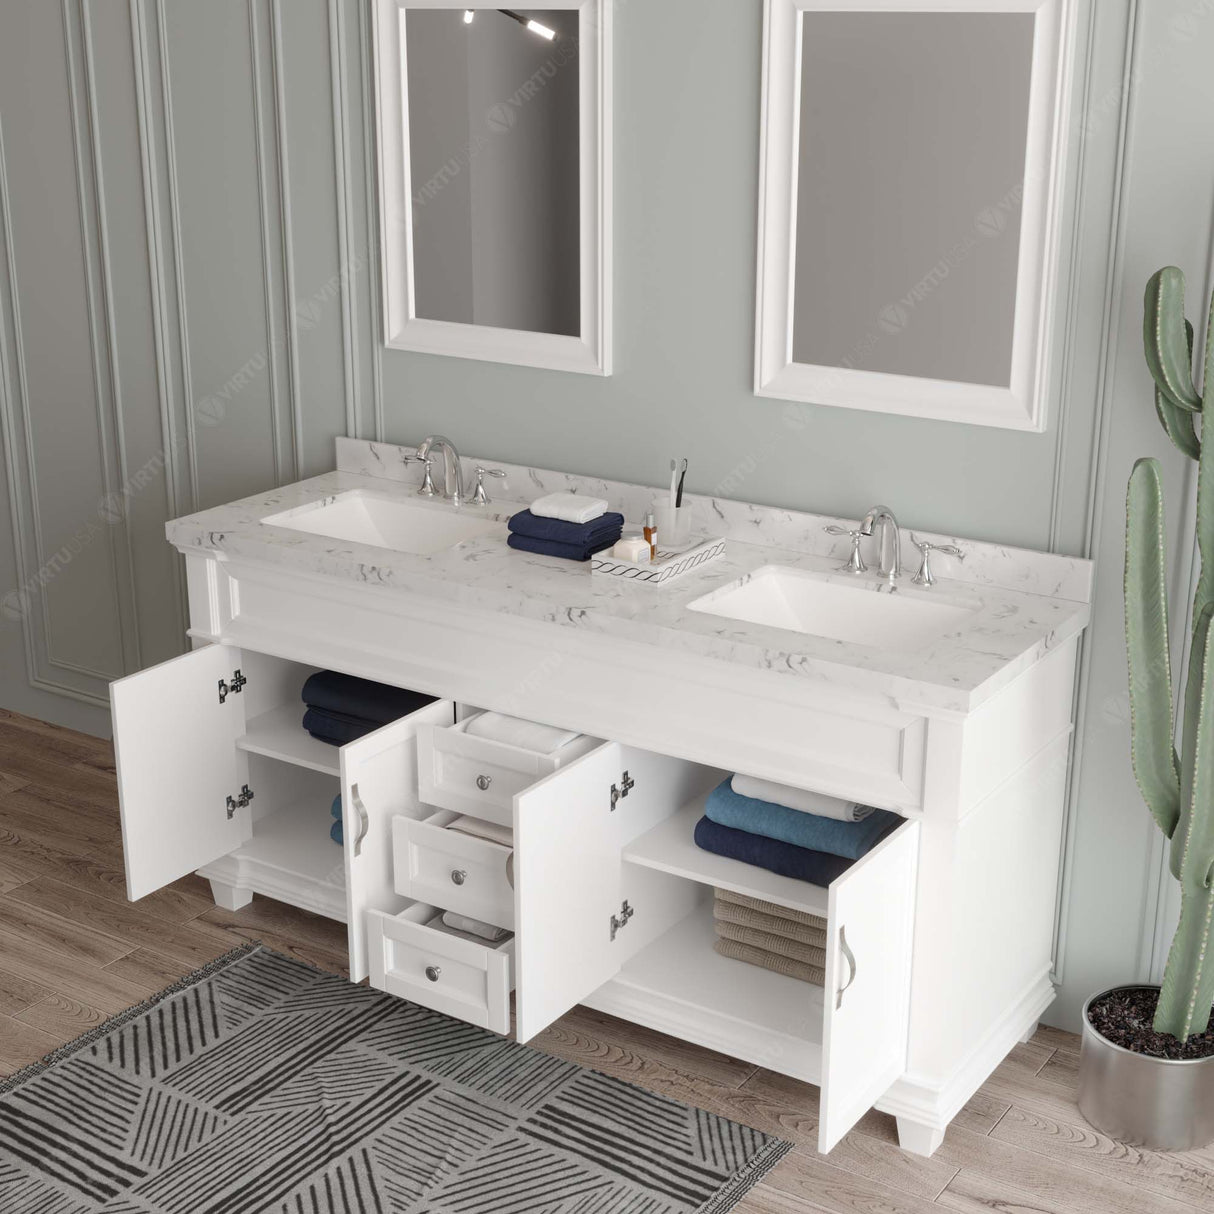 Virtu USA Victoria 72" Double Bath Vanity with Cultured Marble White Top and Square Sinks with Polished Chrome Faucets with Matching Mirror